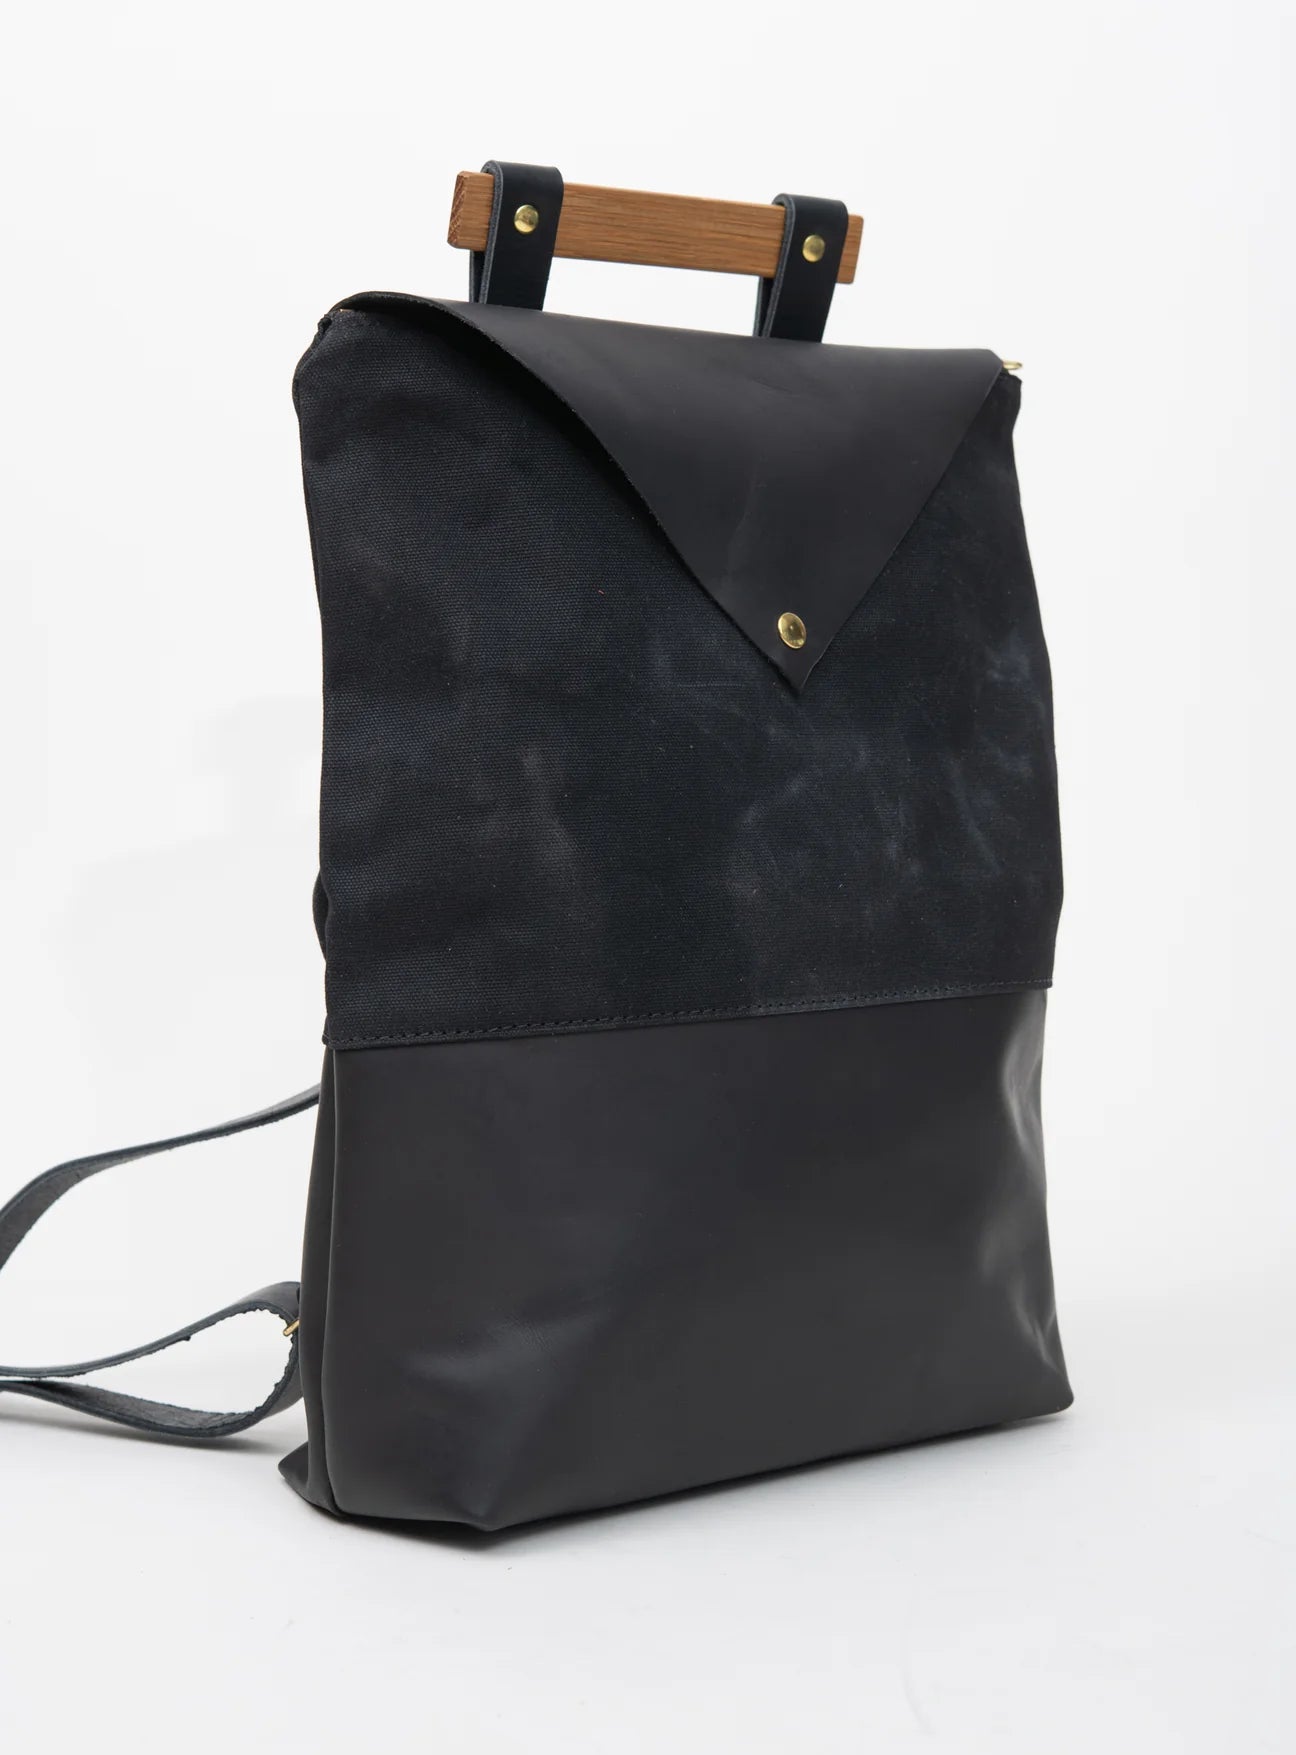 Leather and Waxed Cotton Backpack, Fullum Model